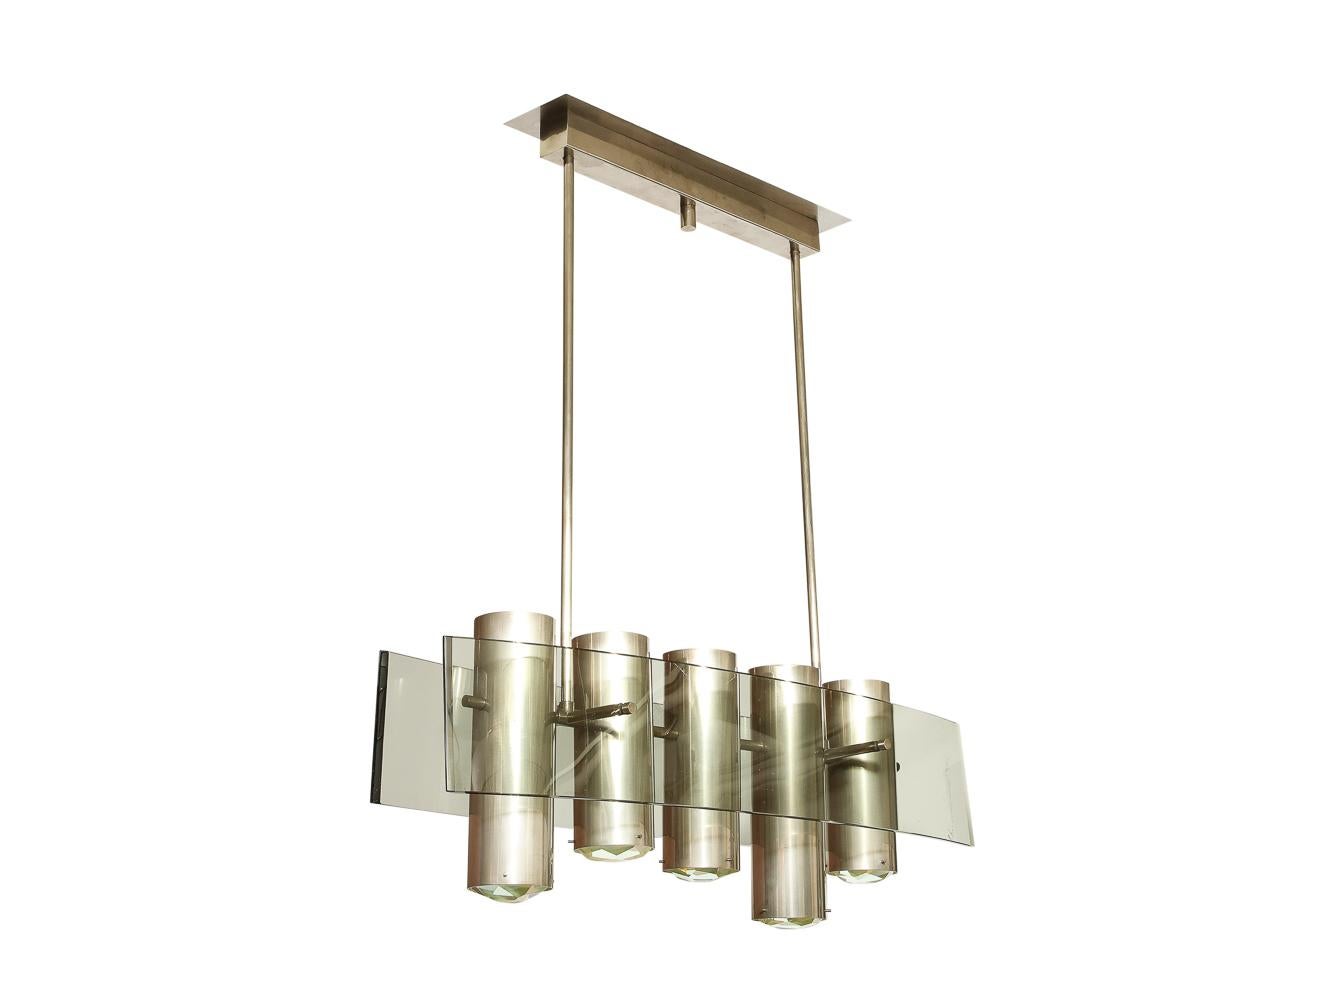 Mid-20th Century Rare Chandelier, No. 2177 by Max Ingrand for Fontana Arte For Sale